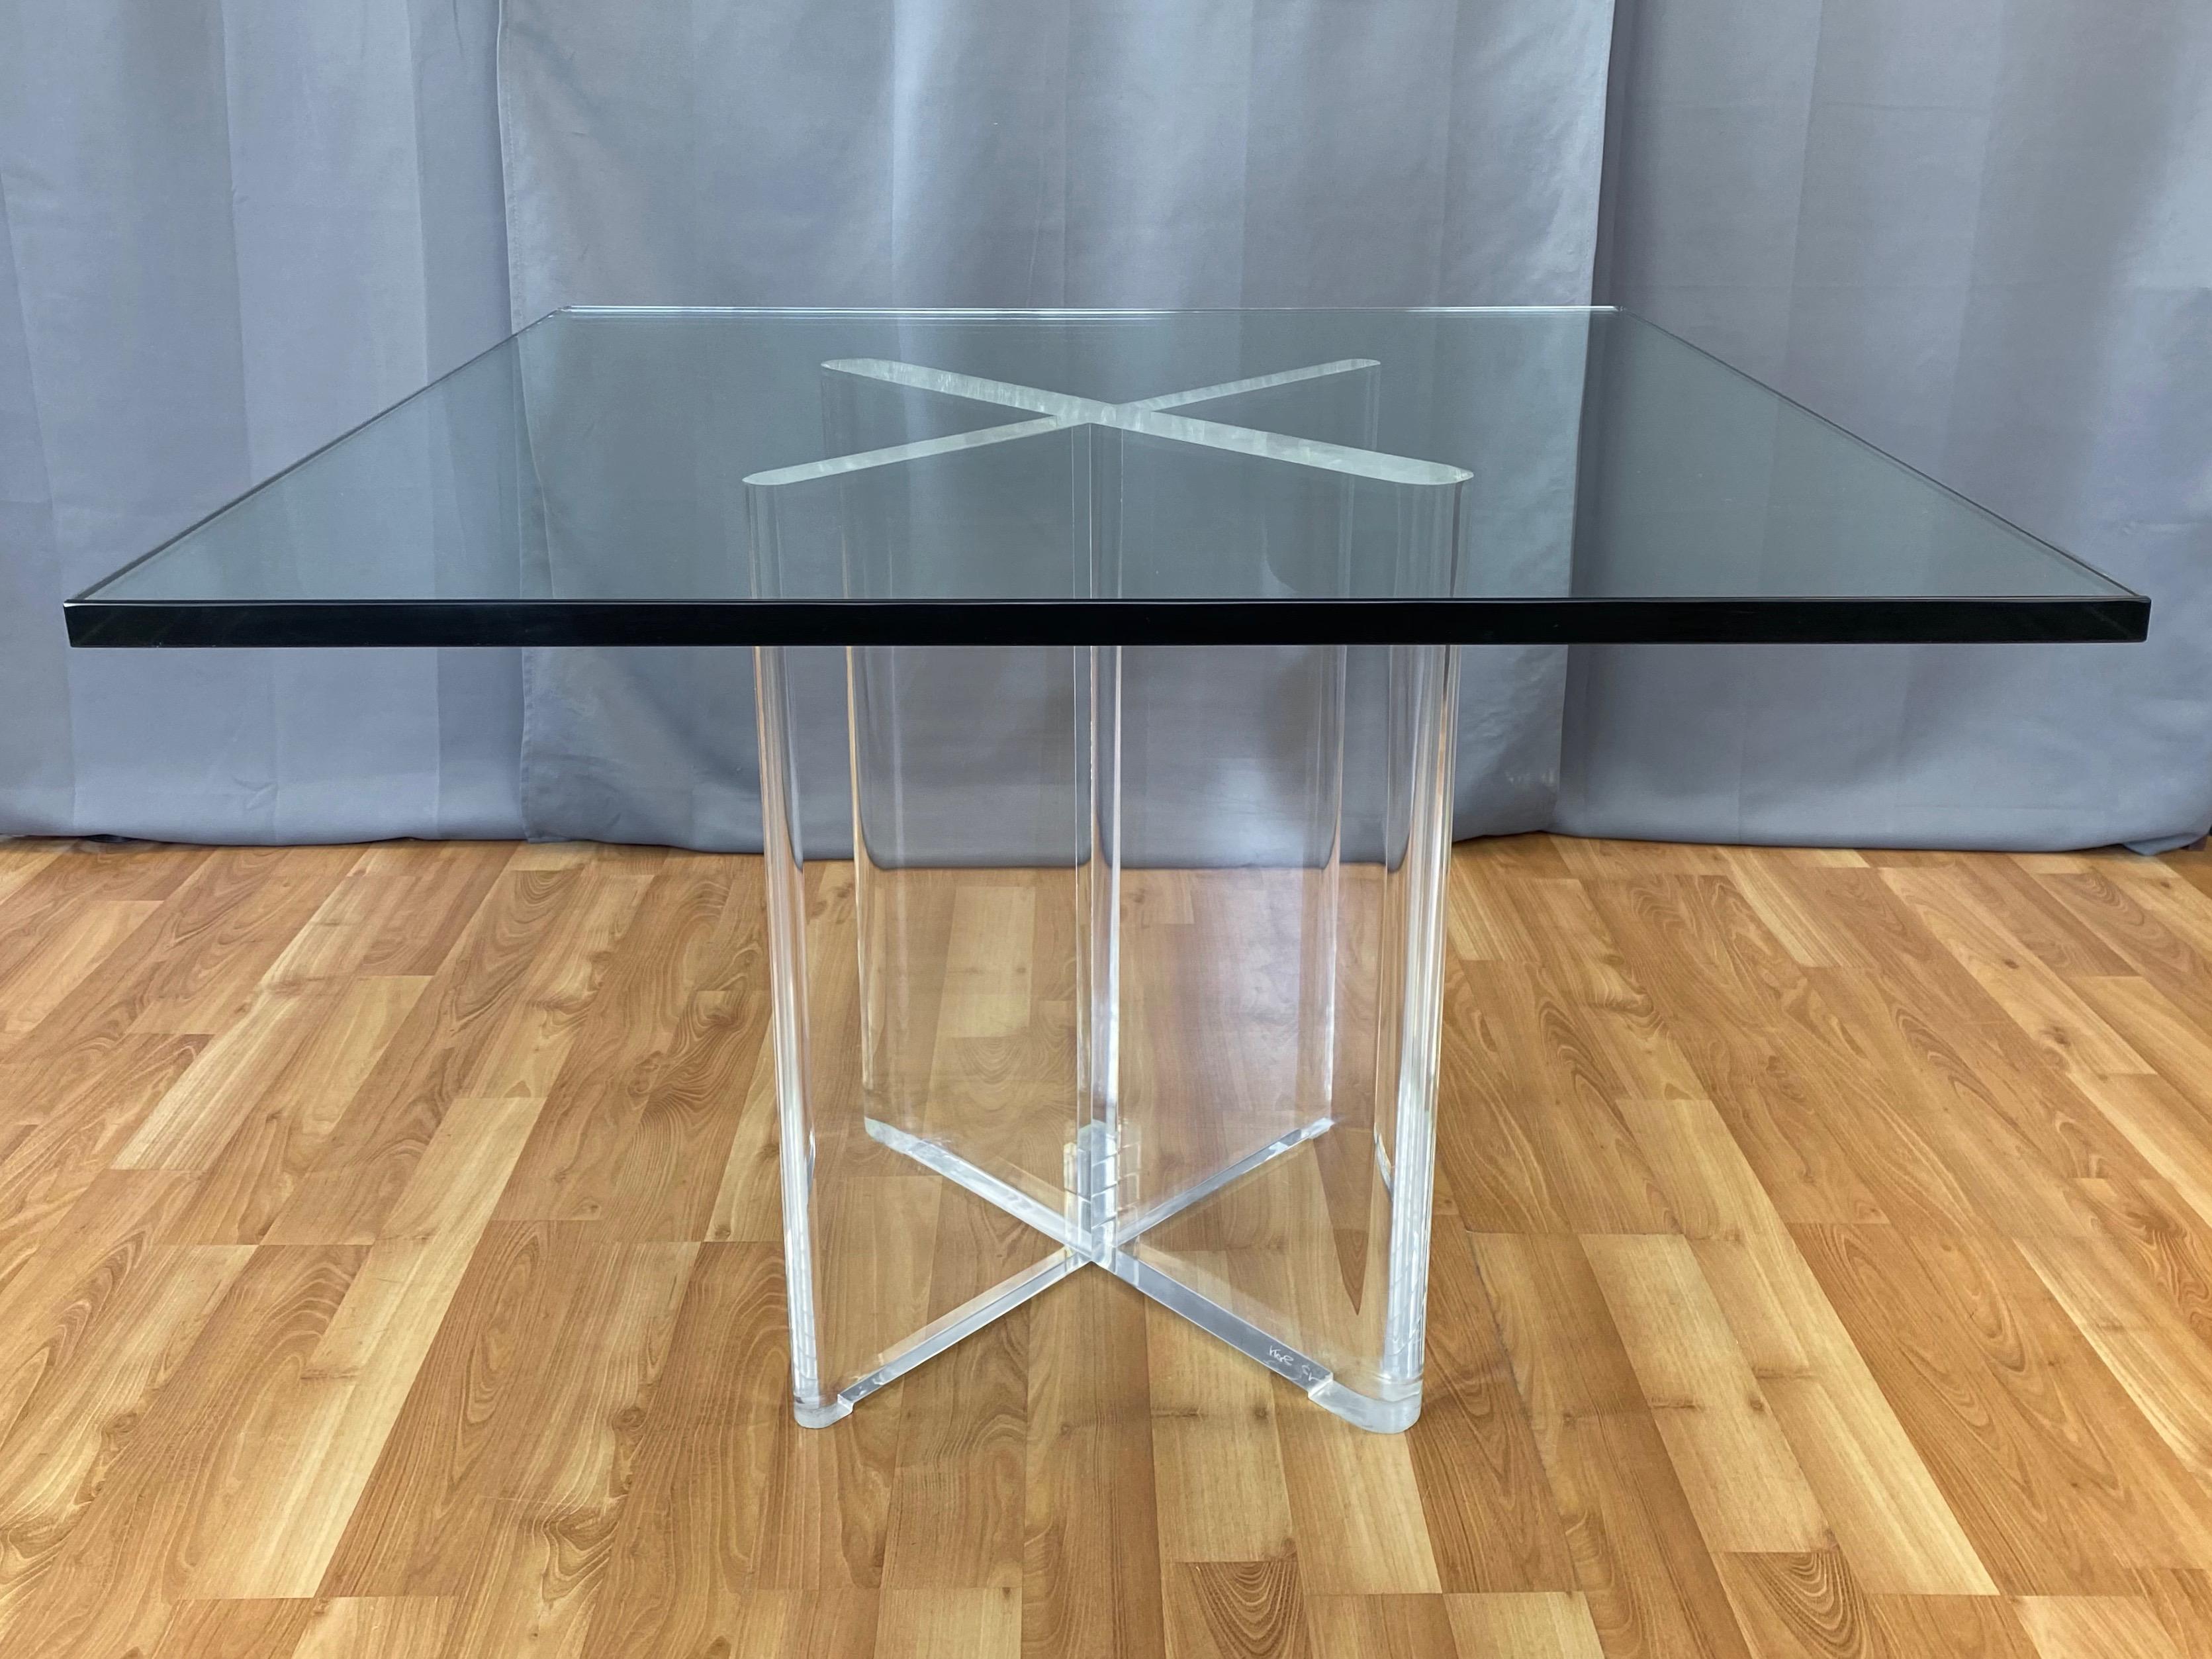 A very impressive and rare 1970s lucite X-base dining table by Karl Springer with extra-thick square glass top.

Strikingly sculptural and substantial solid lucite base comprised of two intersecting rounded-edge slabs, with one being